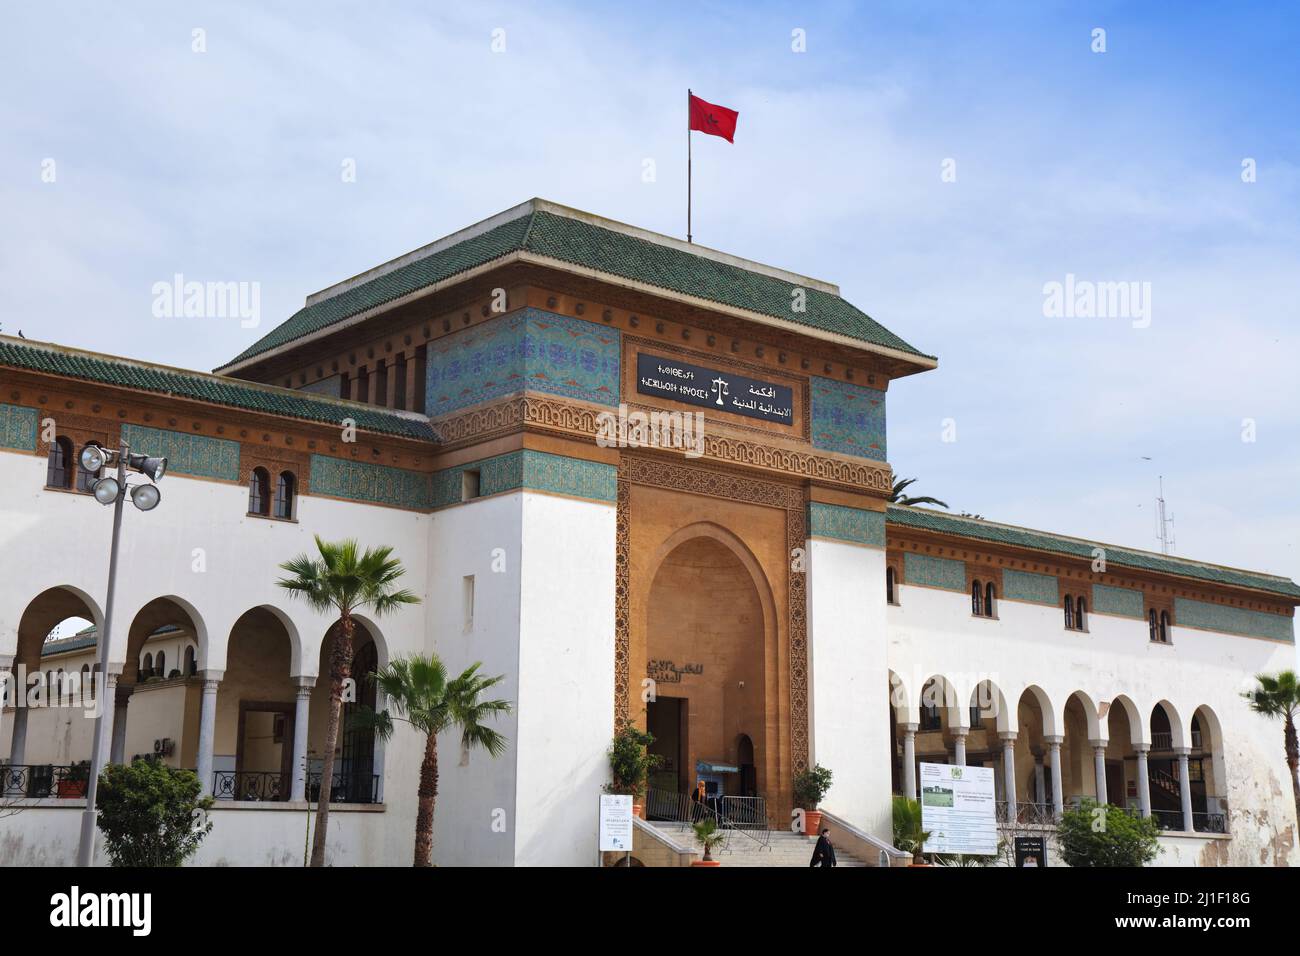 CASABLANCA, MOROCCO - FEBRUARY 22, 2022: Court of First Instance in Casablanca, Morocco. Casablanca is the largest city of Morocco. Stock Photo